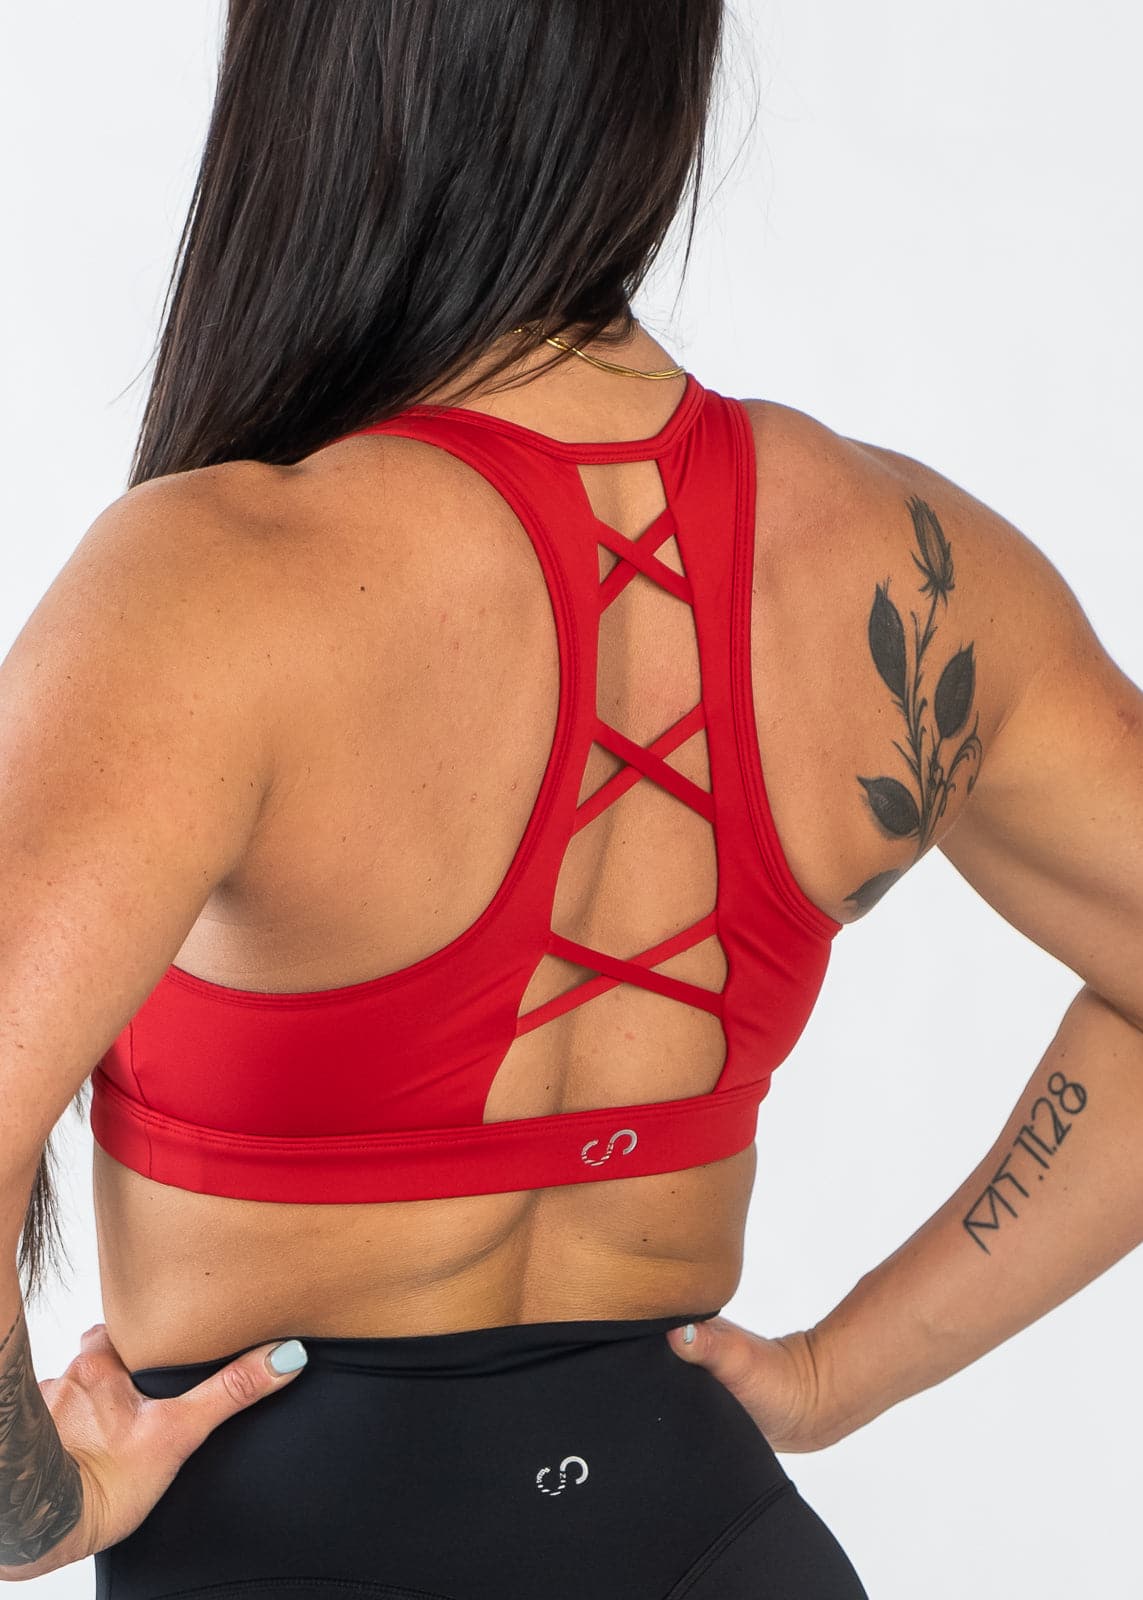 Chin to Waist with Hands on Hips Wearing Empowered Laced Back Sports Bra | Red